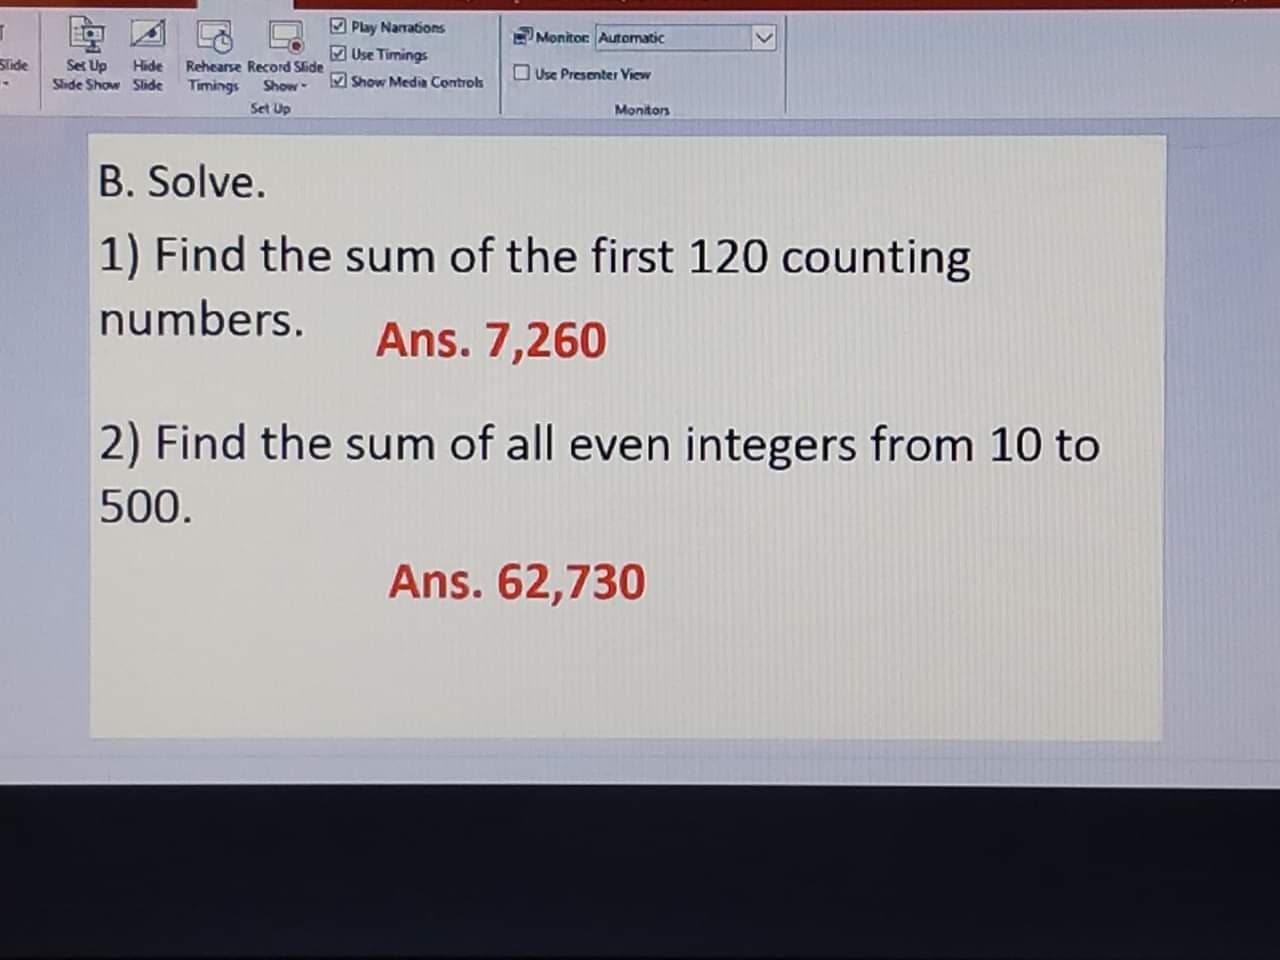 2) Find the sum of all even integers from 10 to
500.
